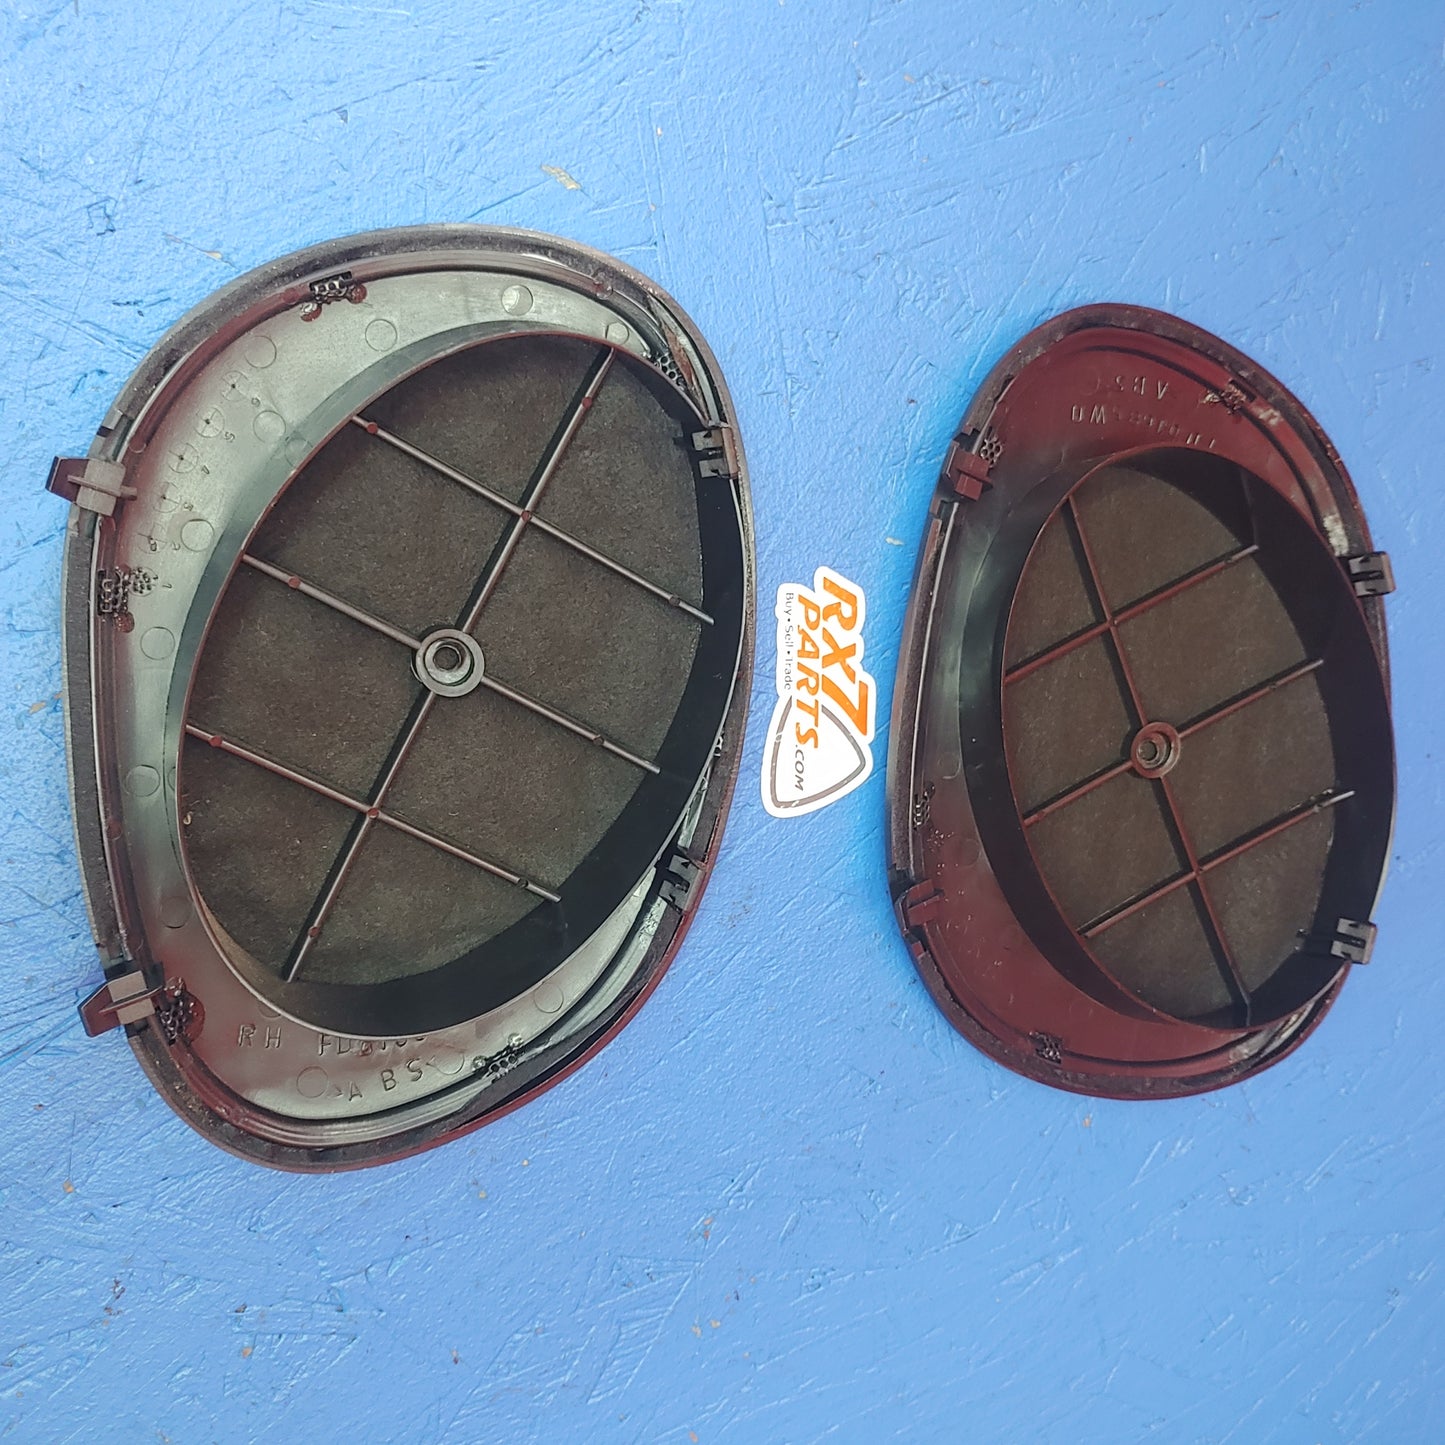 LHD, RHD SPEAKER GRILL LEFT and RIGHT PAIR Mazda Rx7 FD3S FD FD0168 5HO & FD0168 5WO RX7 FD FD3S 93 - 02 Mazda S7B16/1